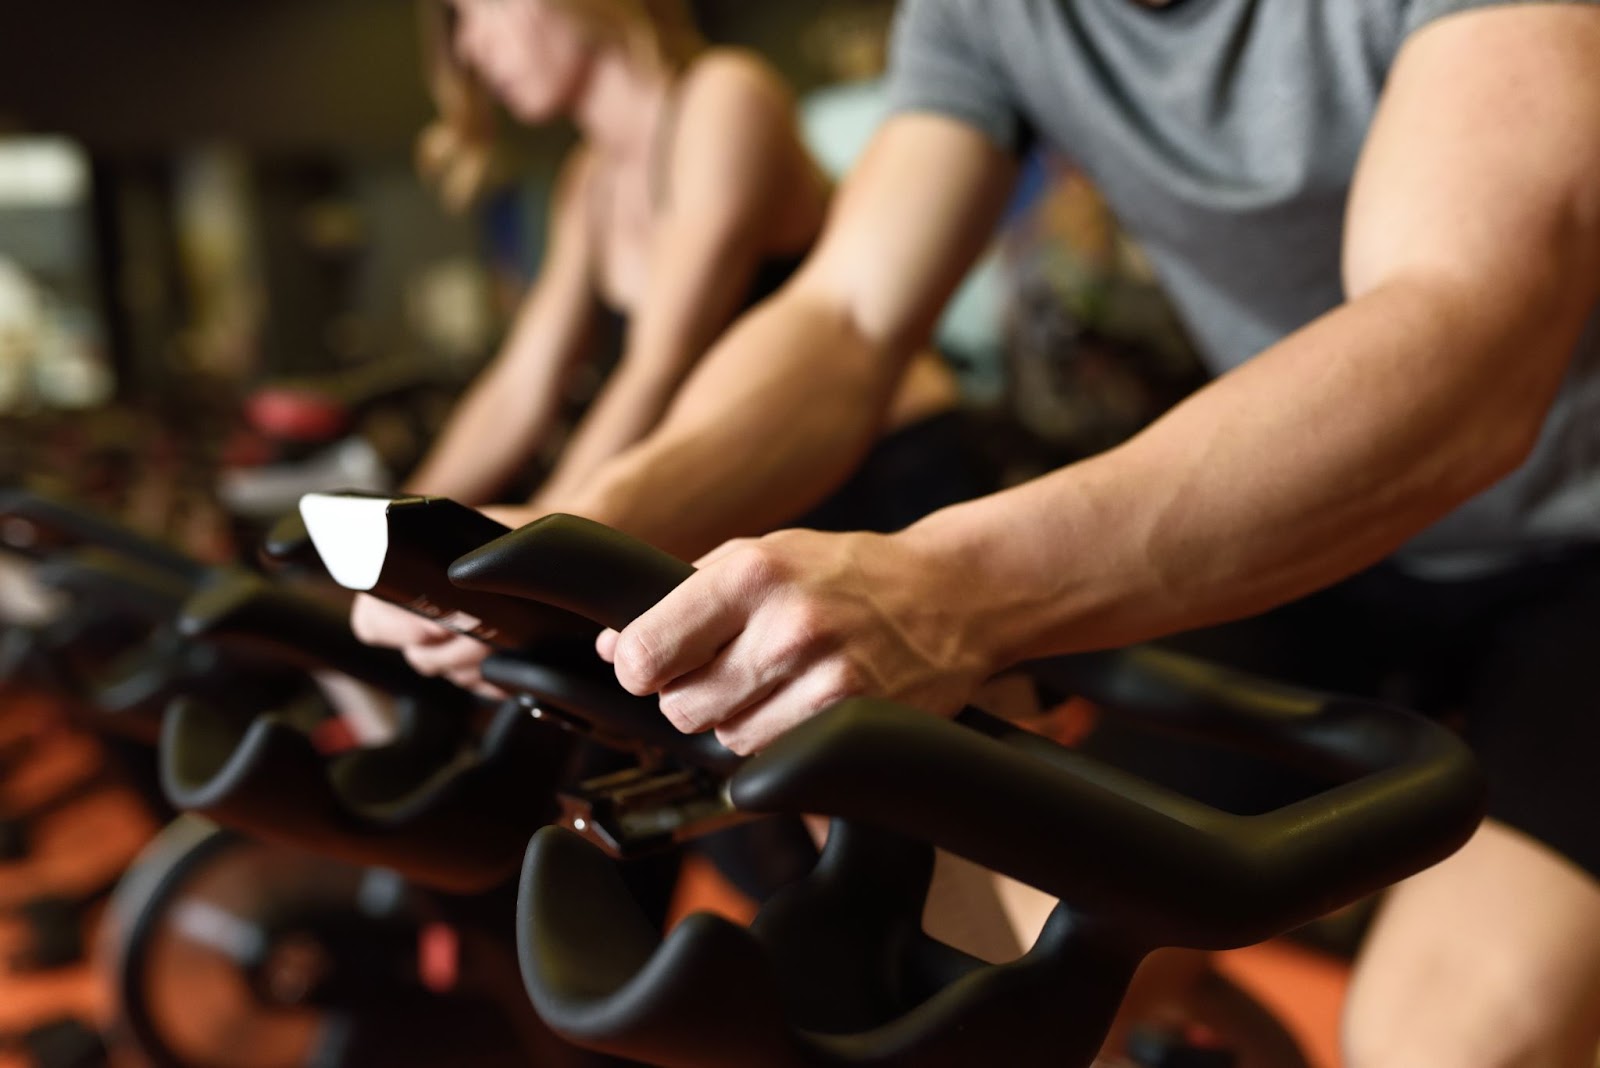 Man adjusting the music on his smartphone in a Spin class